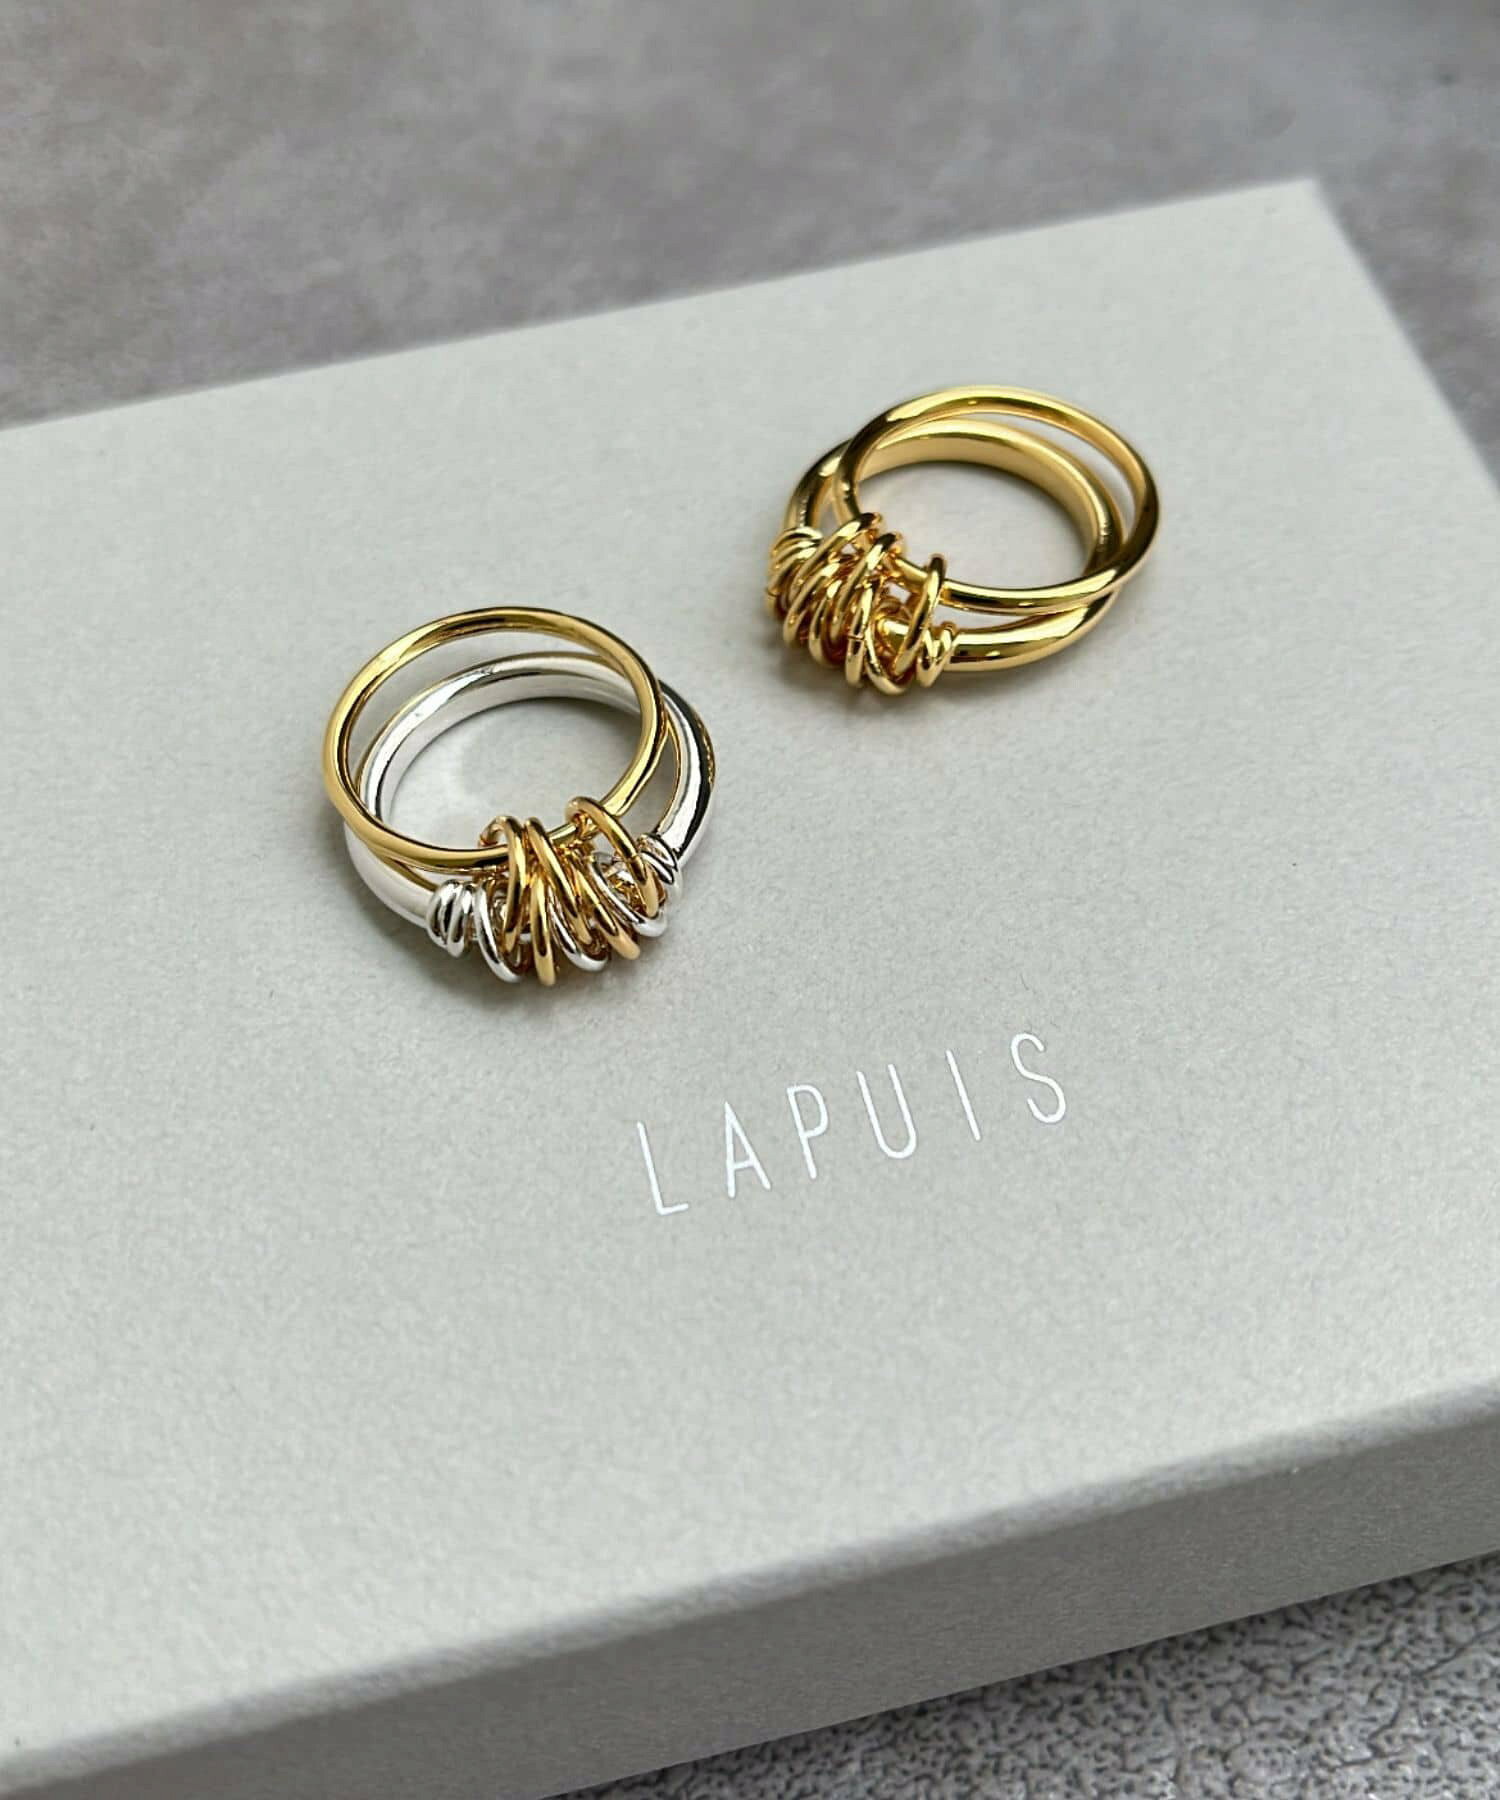 Lapuis COIL DOUBLE リングA